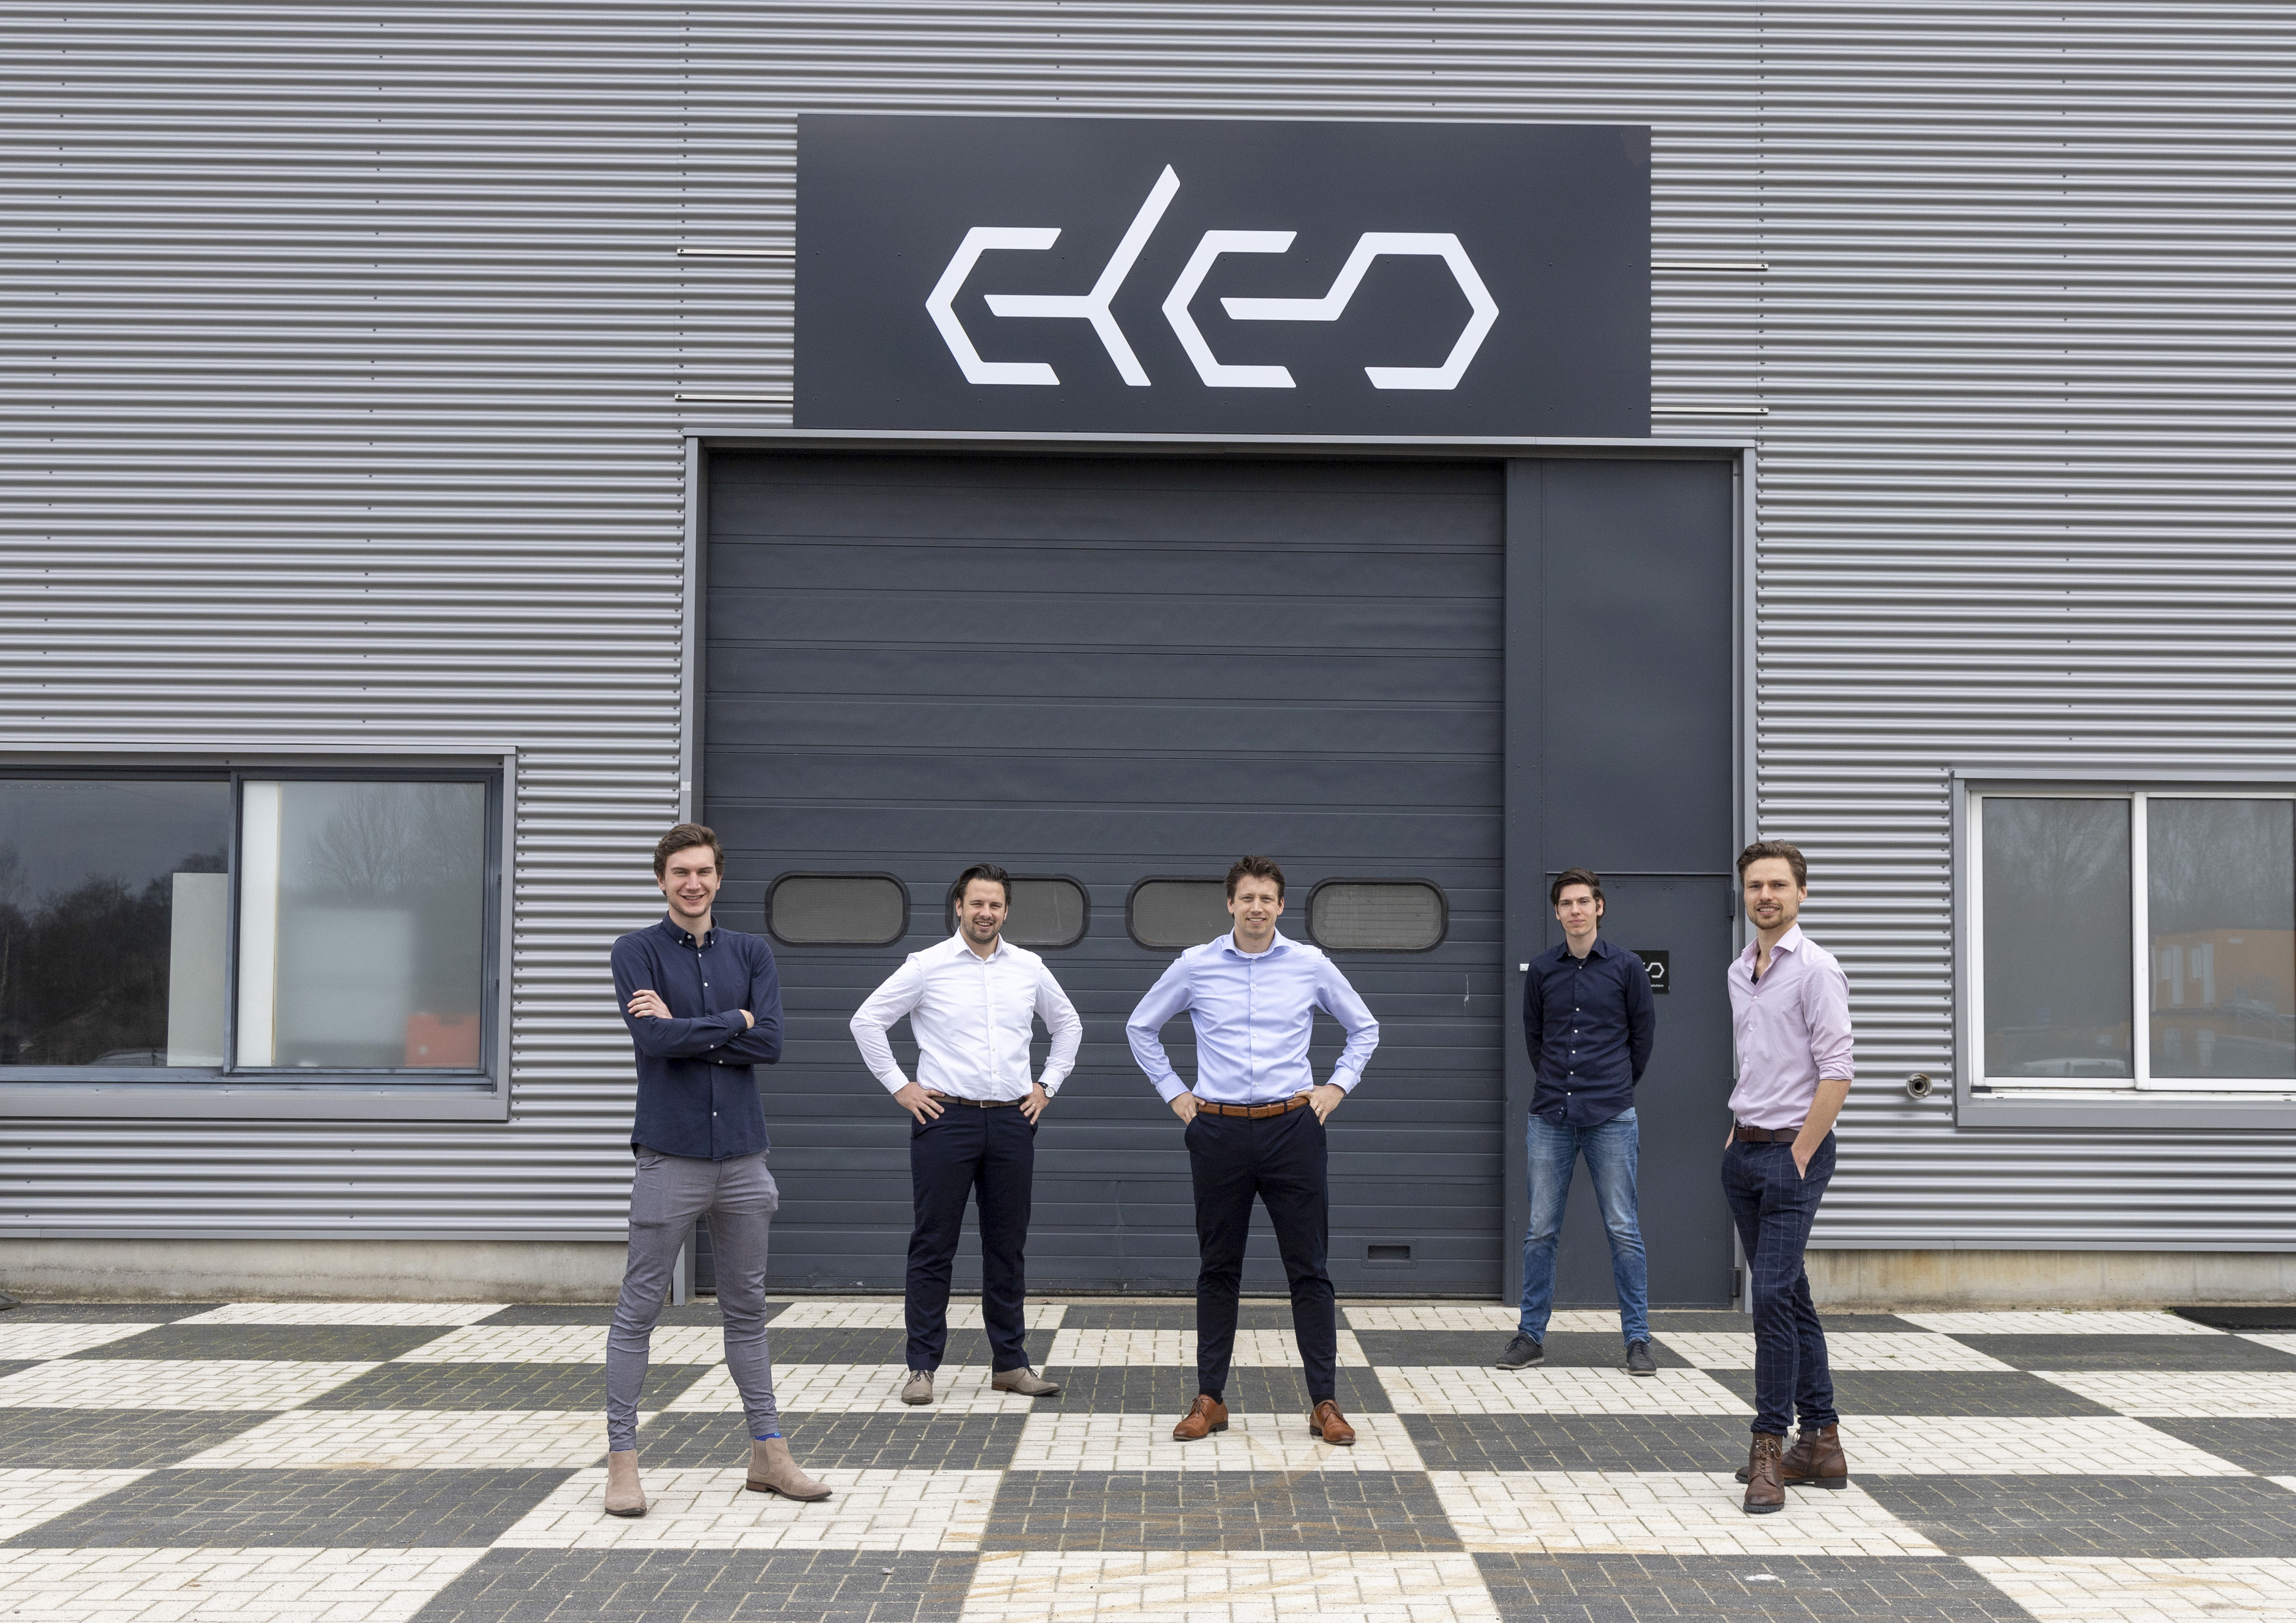 ELEO raises new investment from Lumipol Group